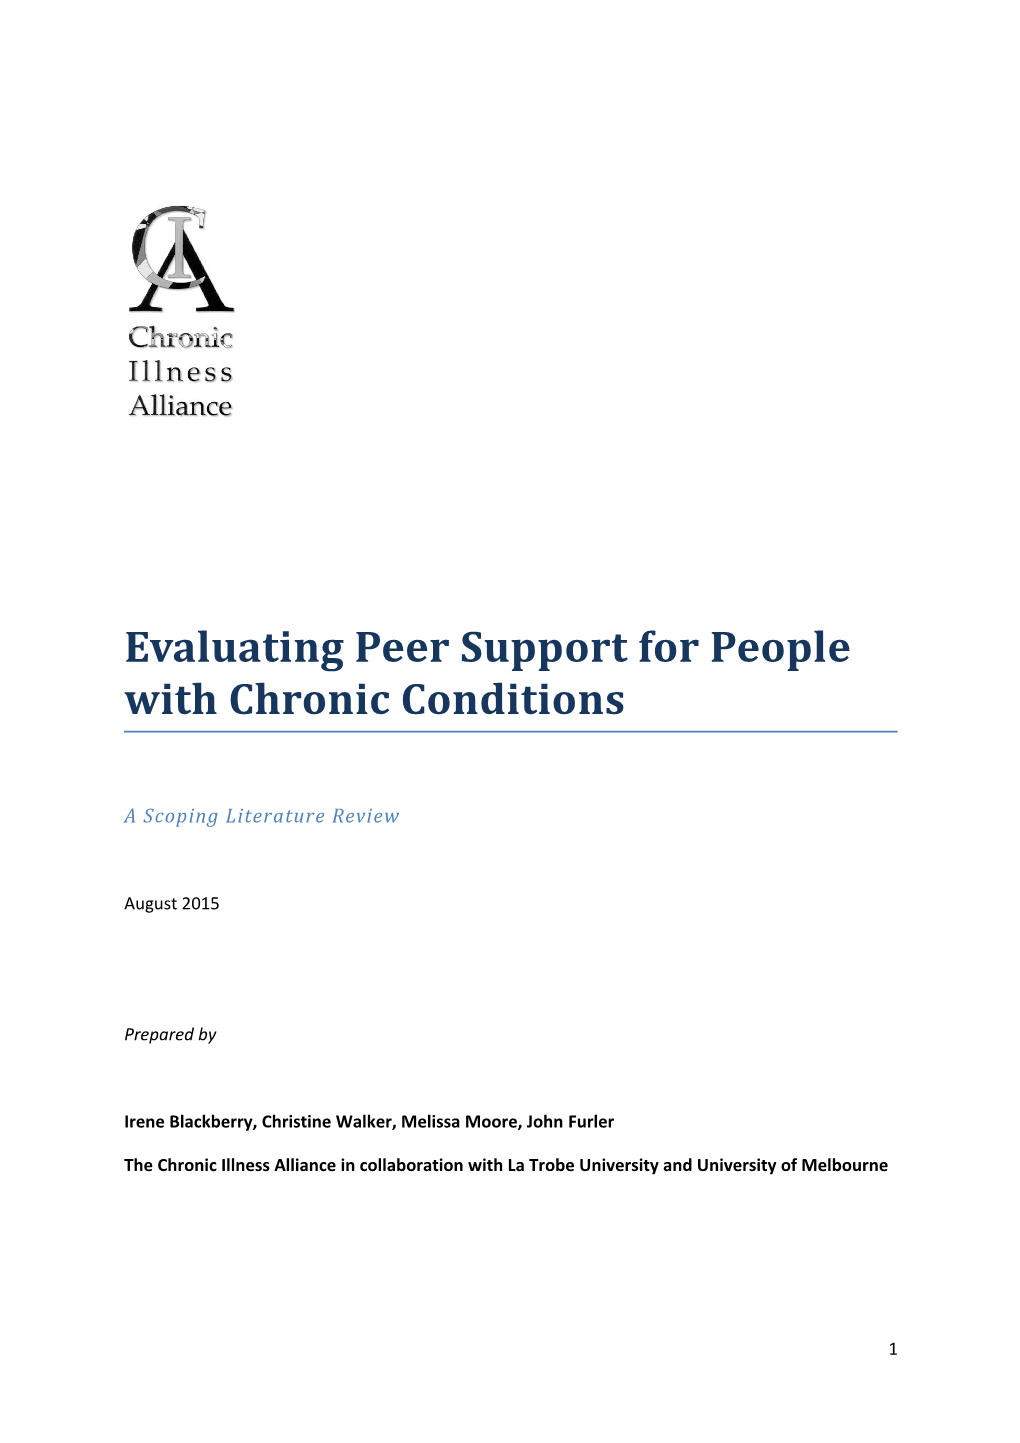 Evaluating Peer Supportfor People with Chronic Conditions